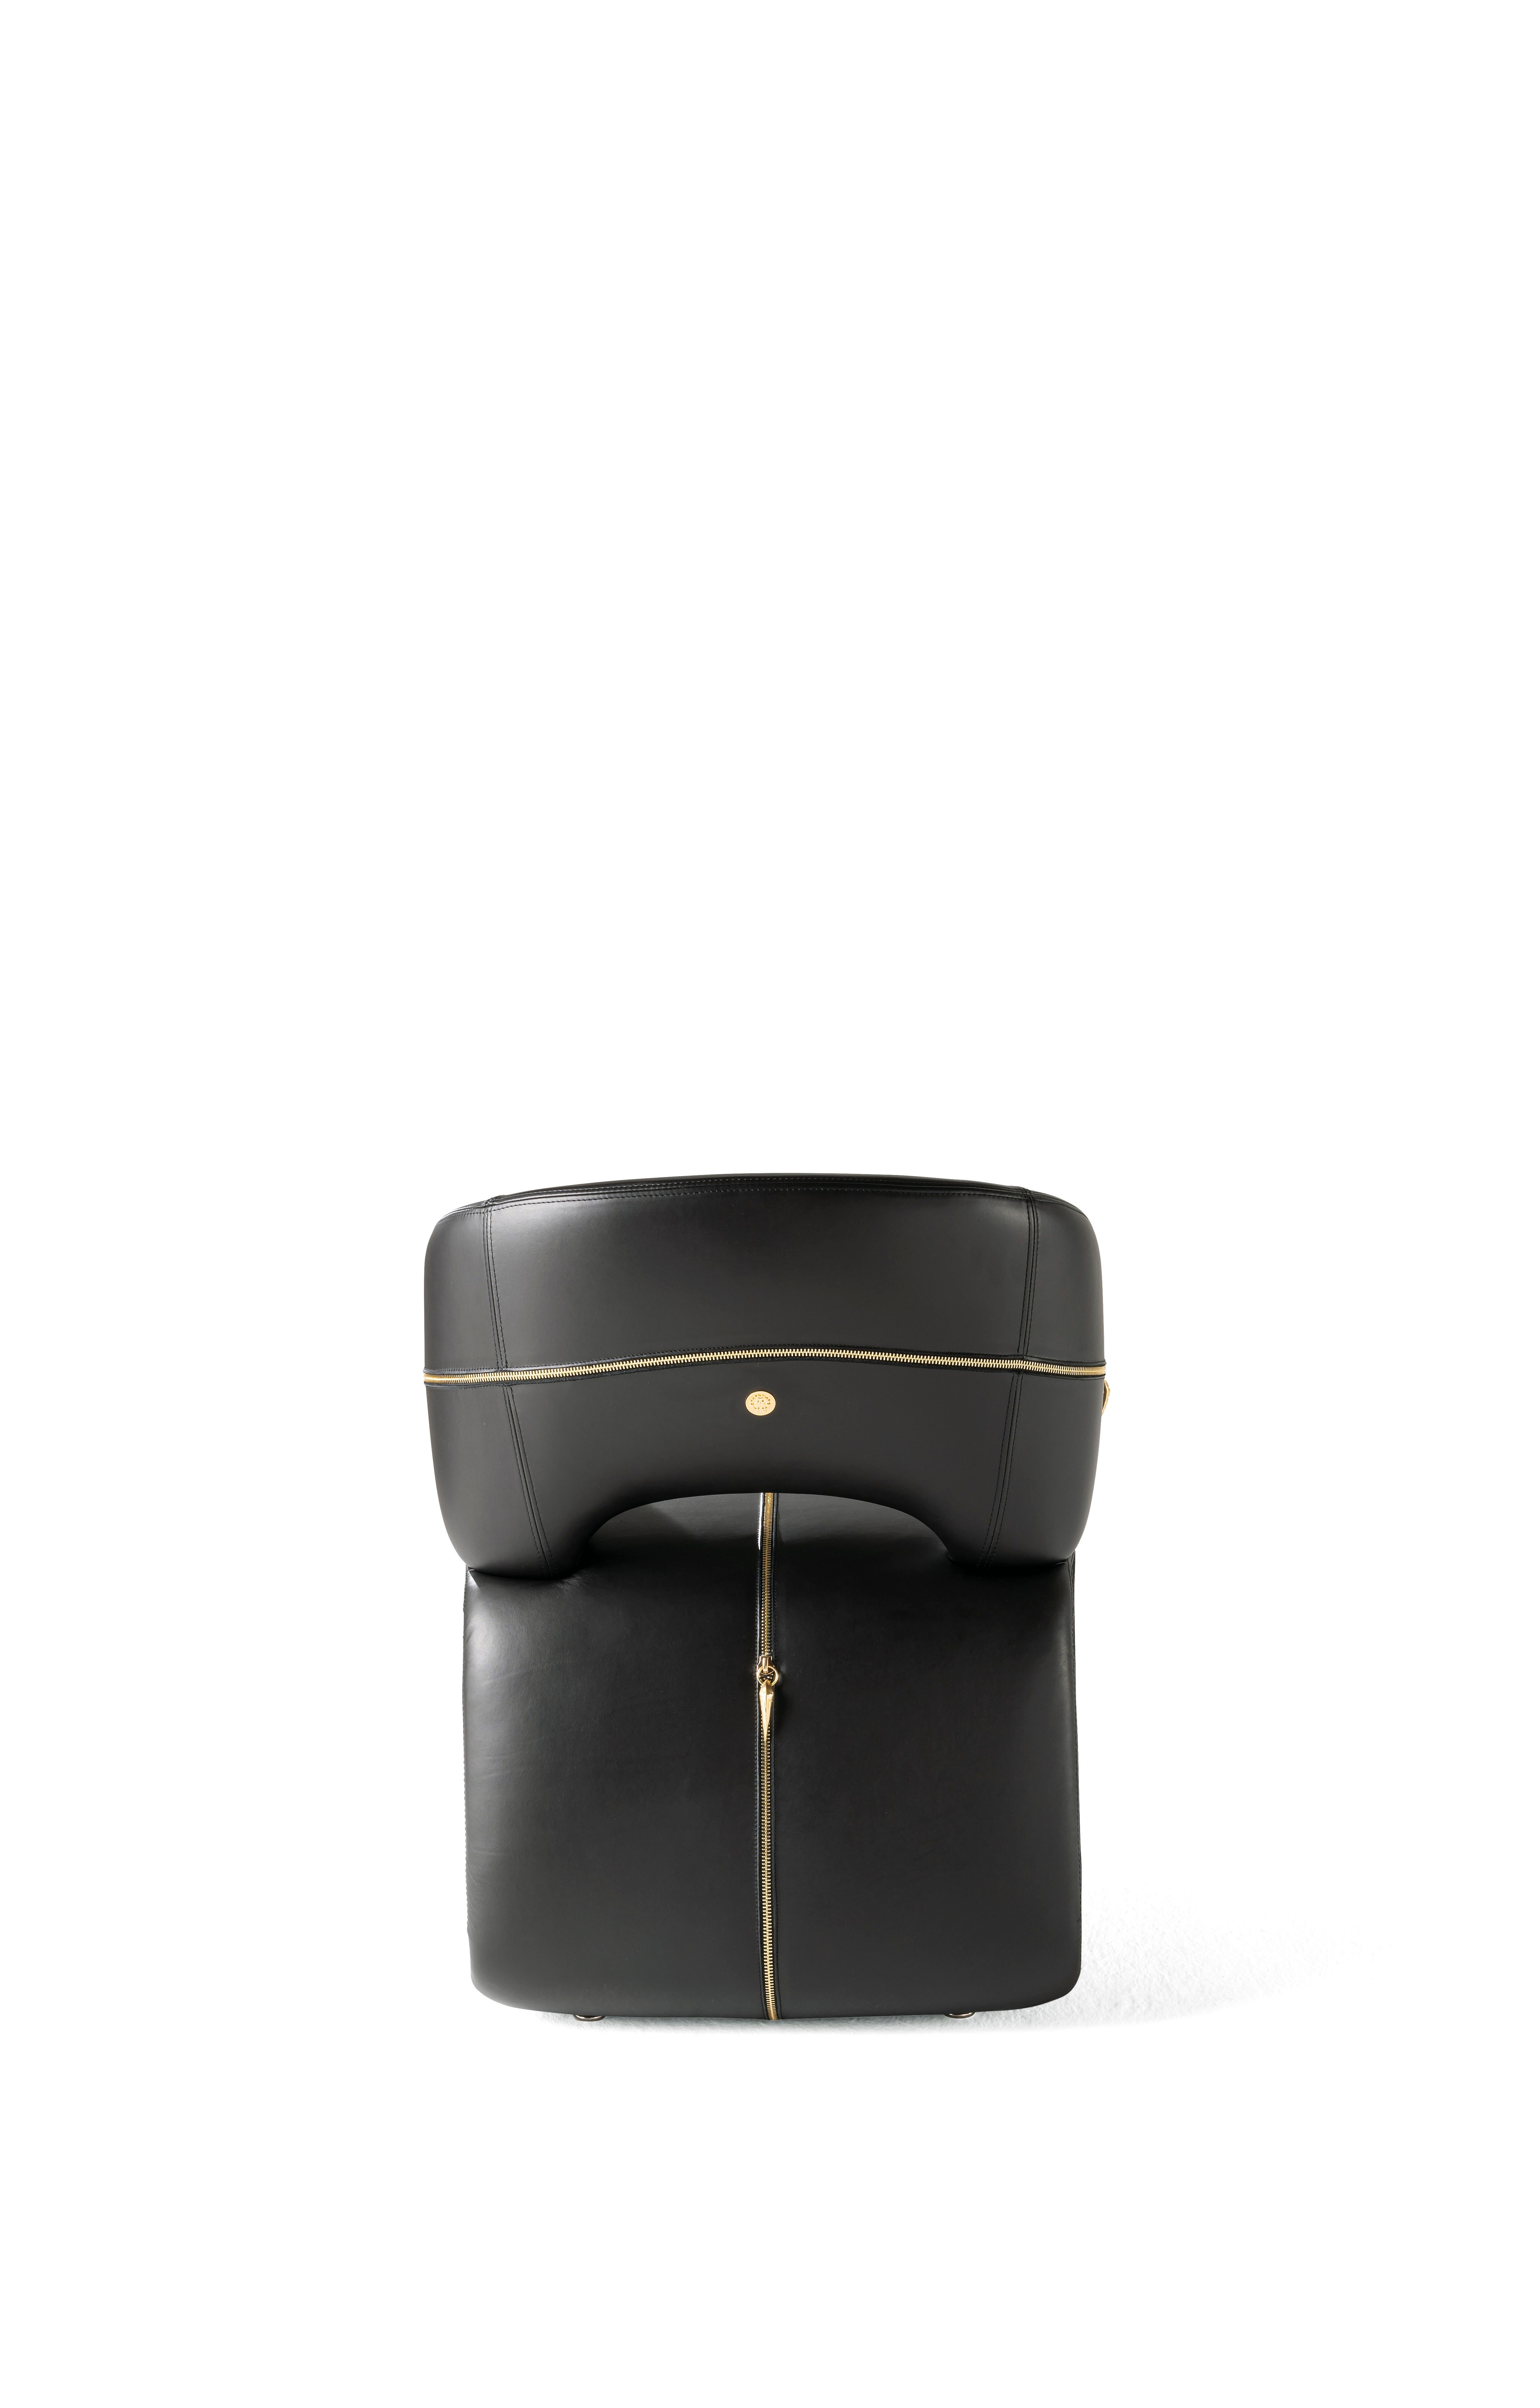 21st Century Wild Armchair in Black Leather by Roberto Cavalli Home Interiors In New Condition For Sale In Cantù, Lombardia